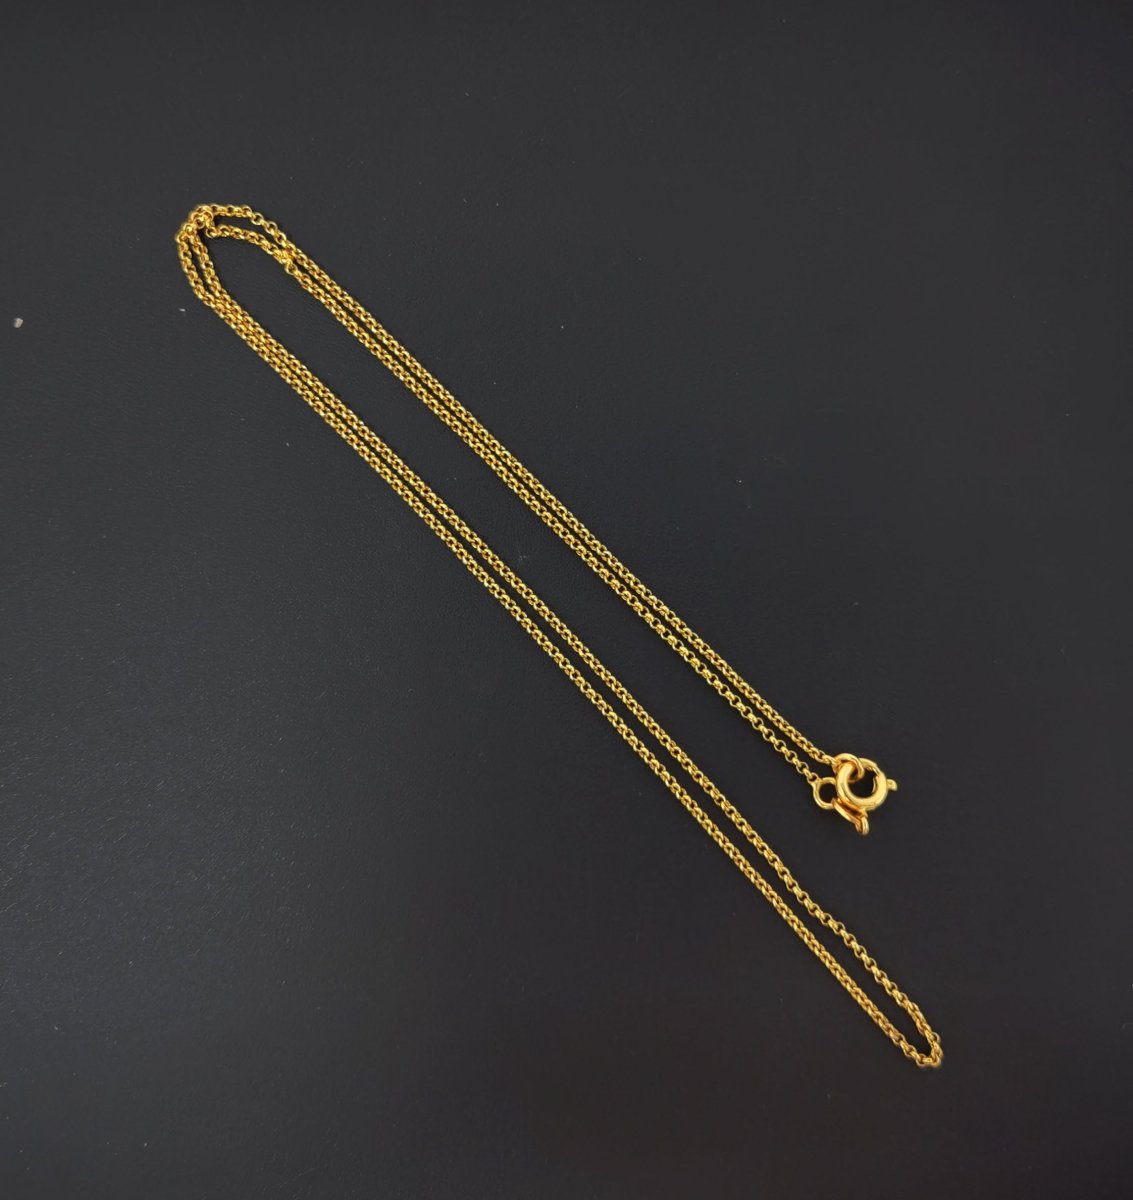 17.7 inch Rolo Necklace Chain For Jewelry Making, 24K Gold Plated Rolo Necklace, Dainty 1mm Rolo Necklace w/ Spring Ring | CN-443 Clearance Pricing - DLUXCA